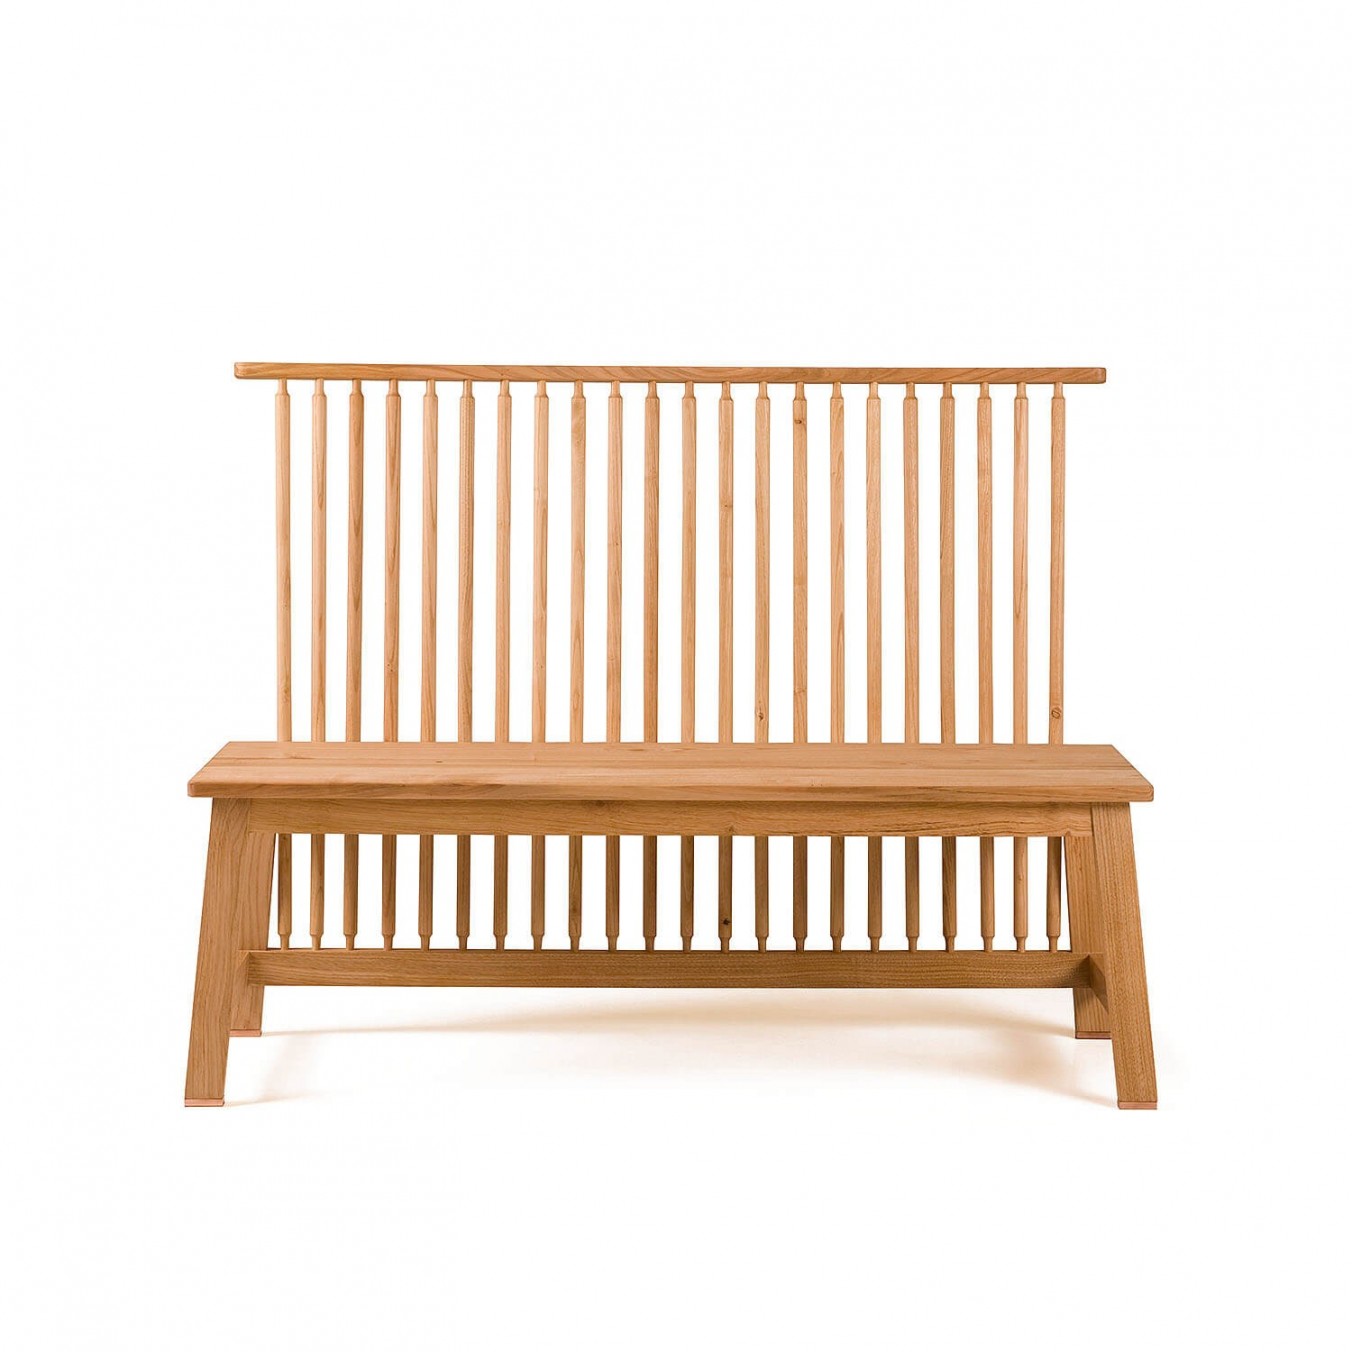 2-SEATER BENCH WITH BACK